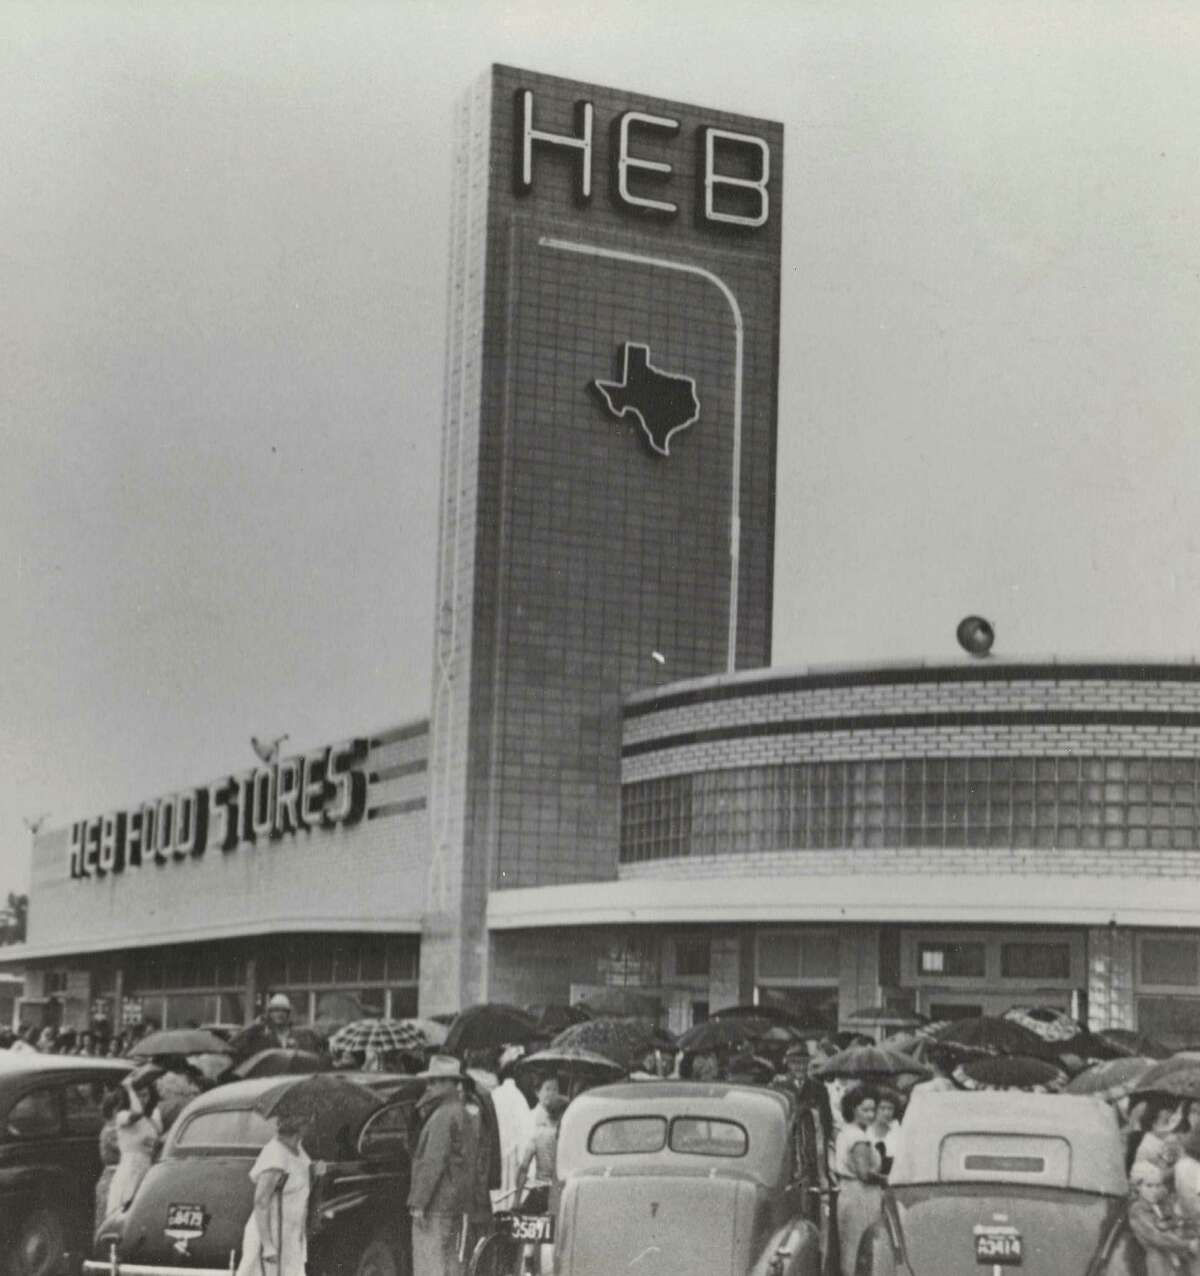 Customers crowd around the entrance of H-E-B's store at 1601 Nogalitos St. on its opening day, April 1, 1945.